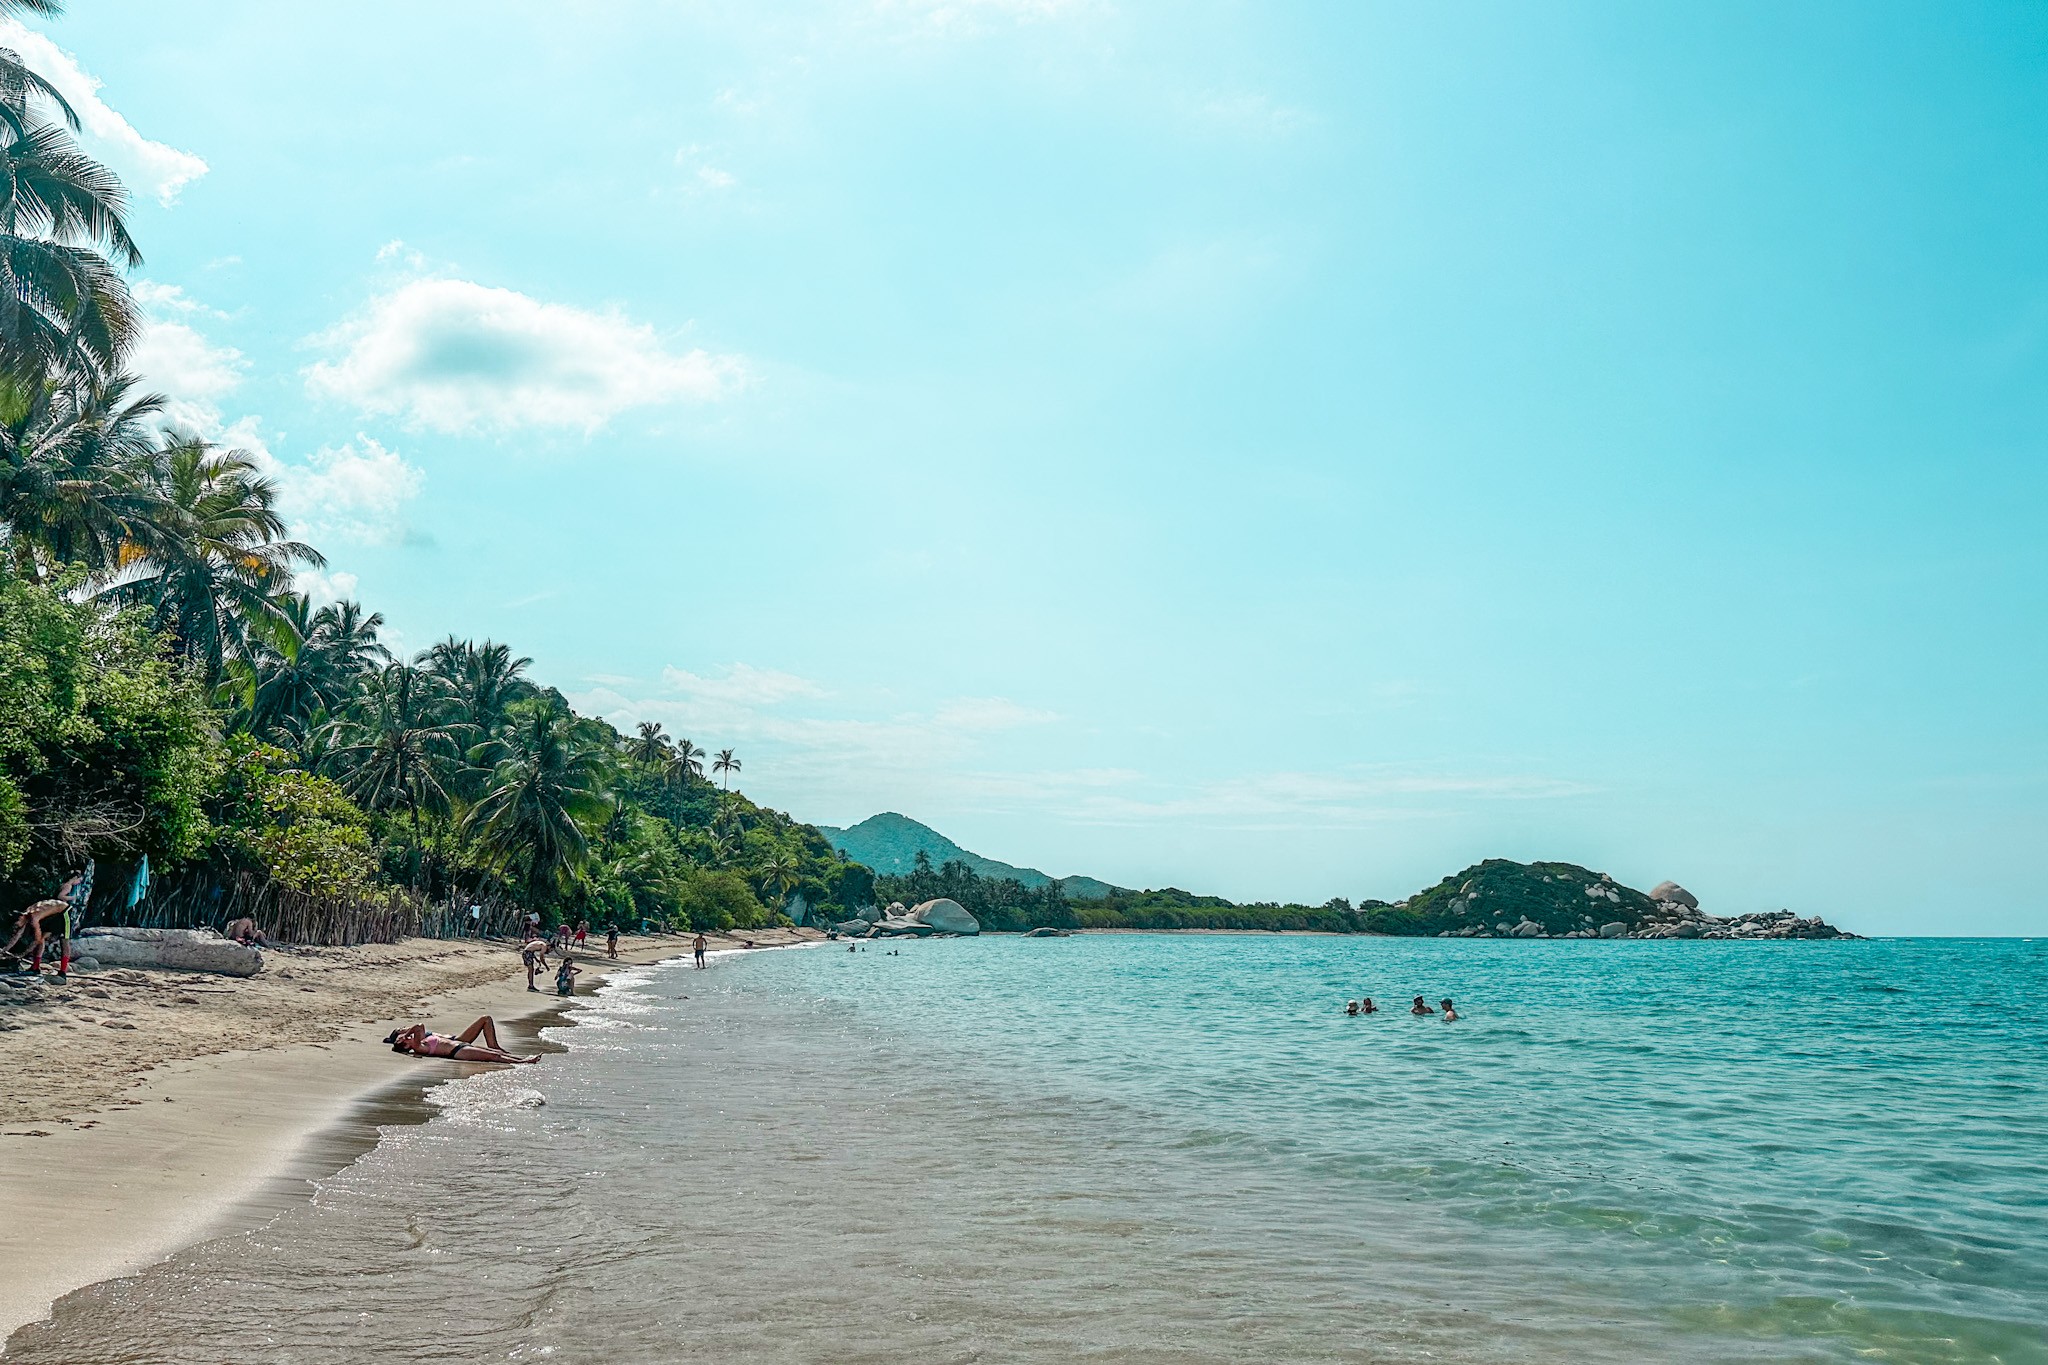 Guide to Tayrona National Park 2023 - Best Things to Do in Tayrona (La Piscina Beach)